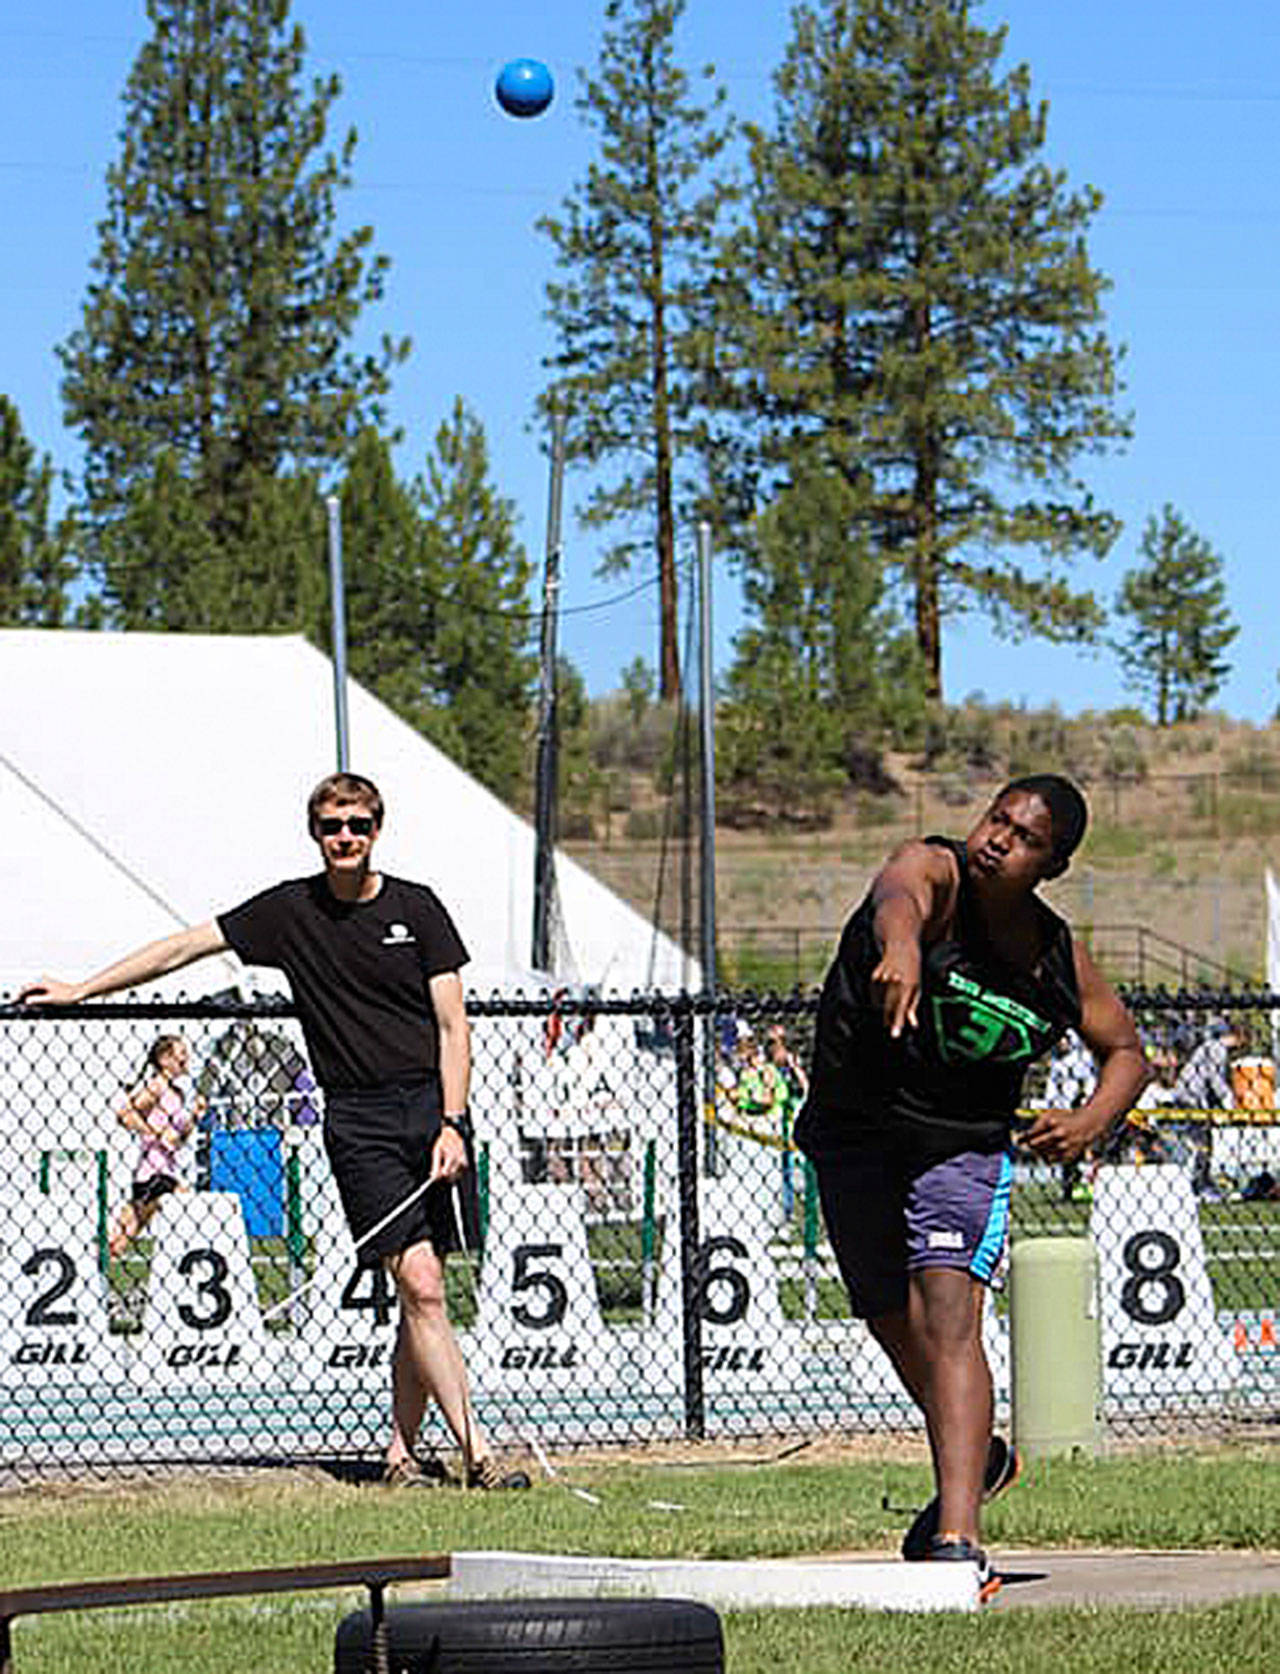 Team Evolution’s Jabron Brooks heaves a shot put nearly 38 feet to place fourth in the event in the Boys 13-14 division, qualifying him for a spot in the Junior Olympic championships July 23-29. (Photo by Sarah Navarre)